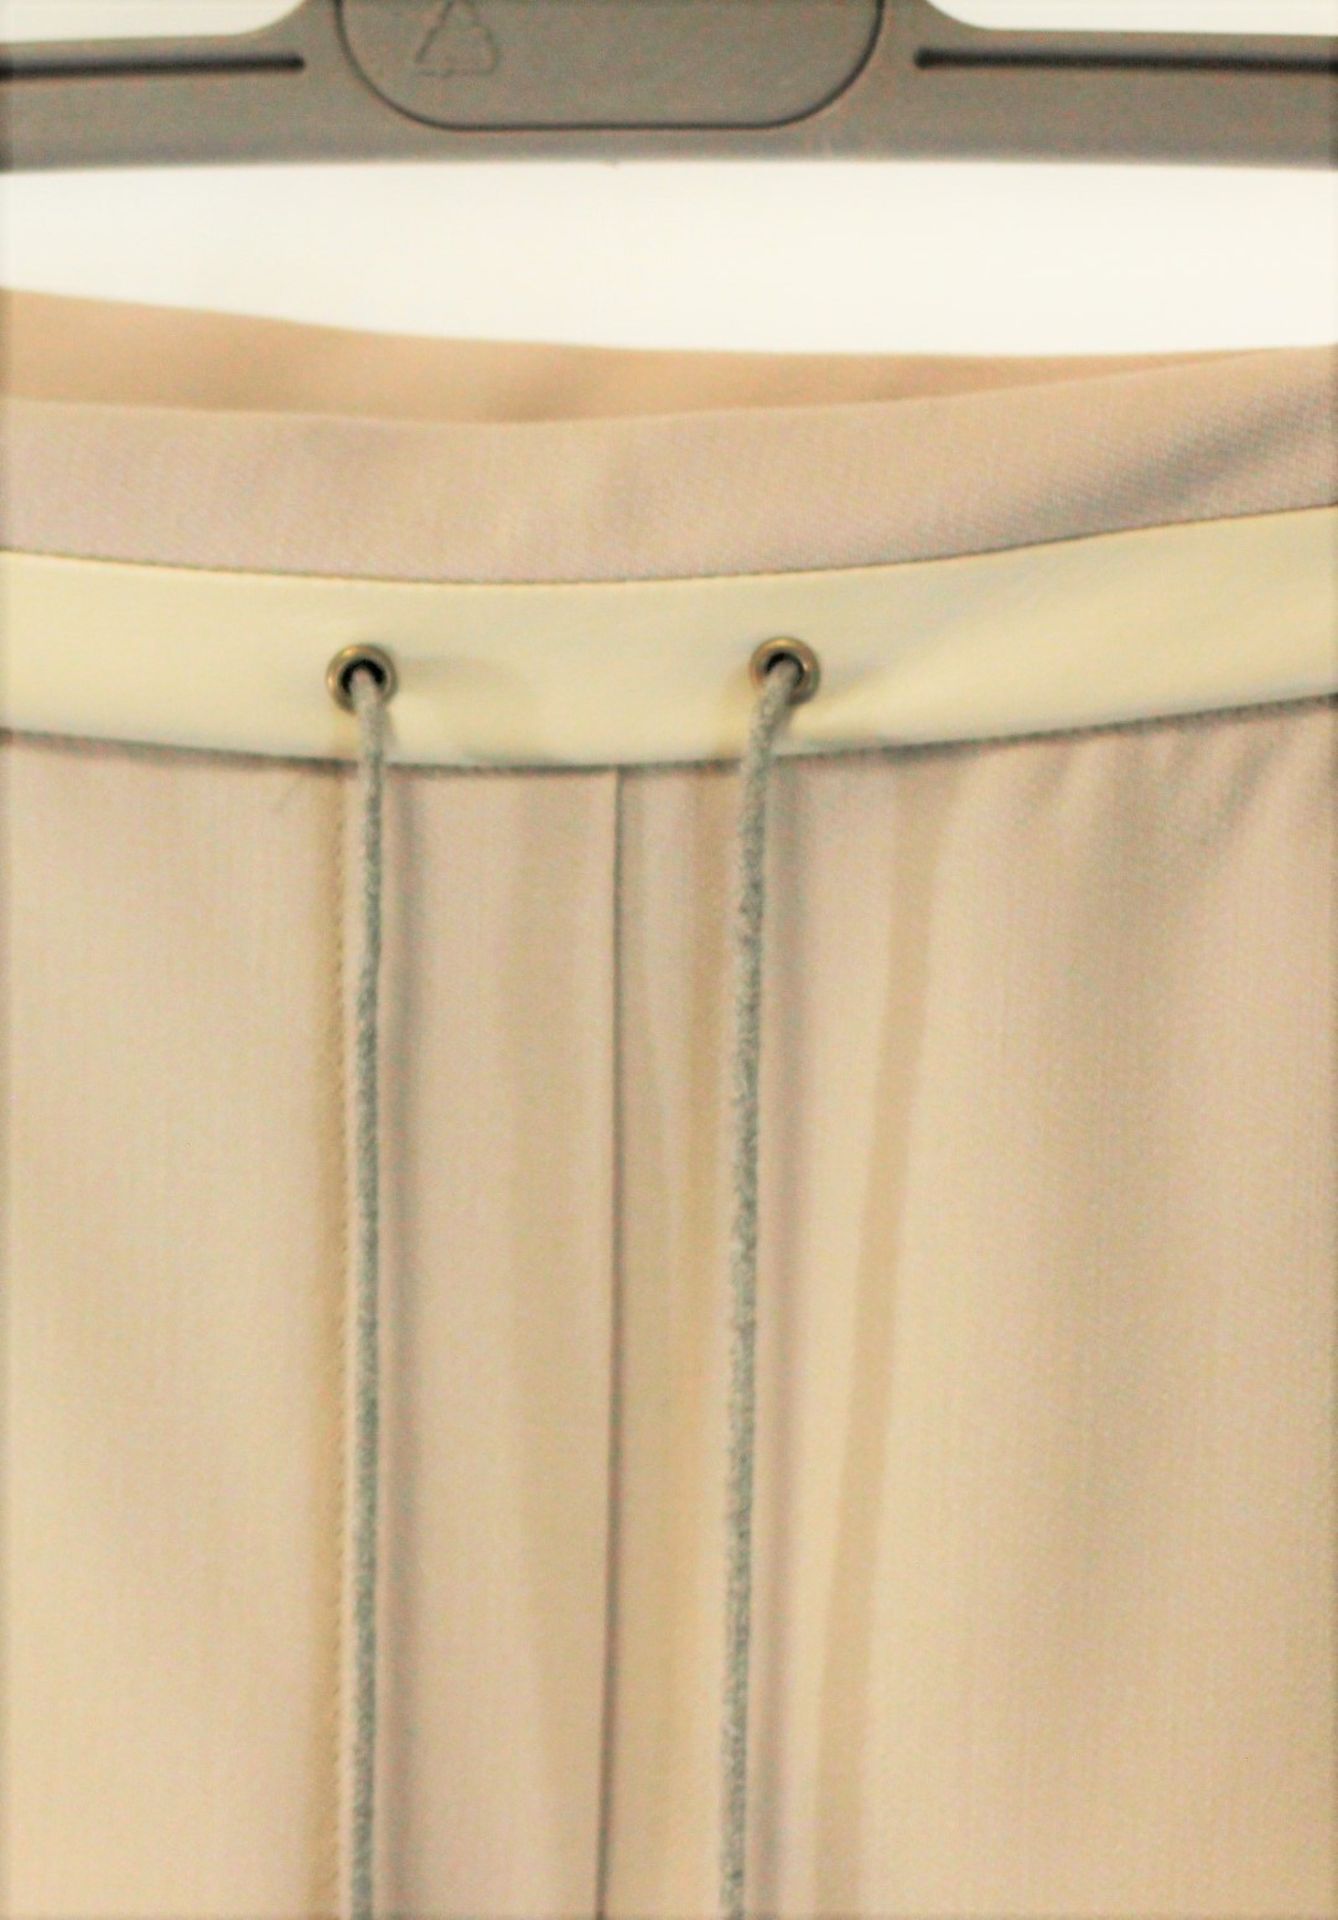 1 x Fabiana Filippi Cool Beige Slacks - Size: 14 - Material: Marino Wool - From a High End - Image 2 of 3